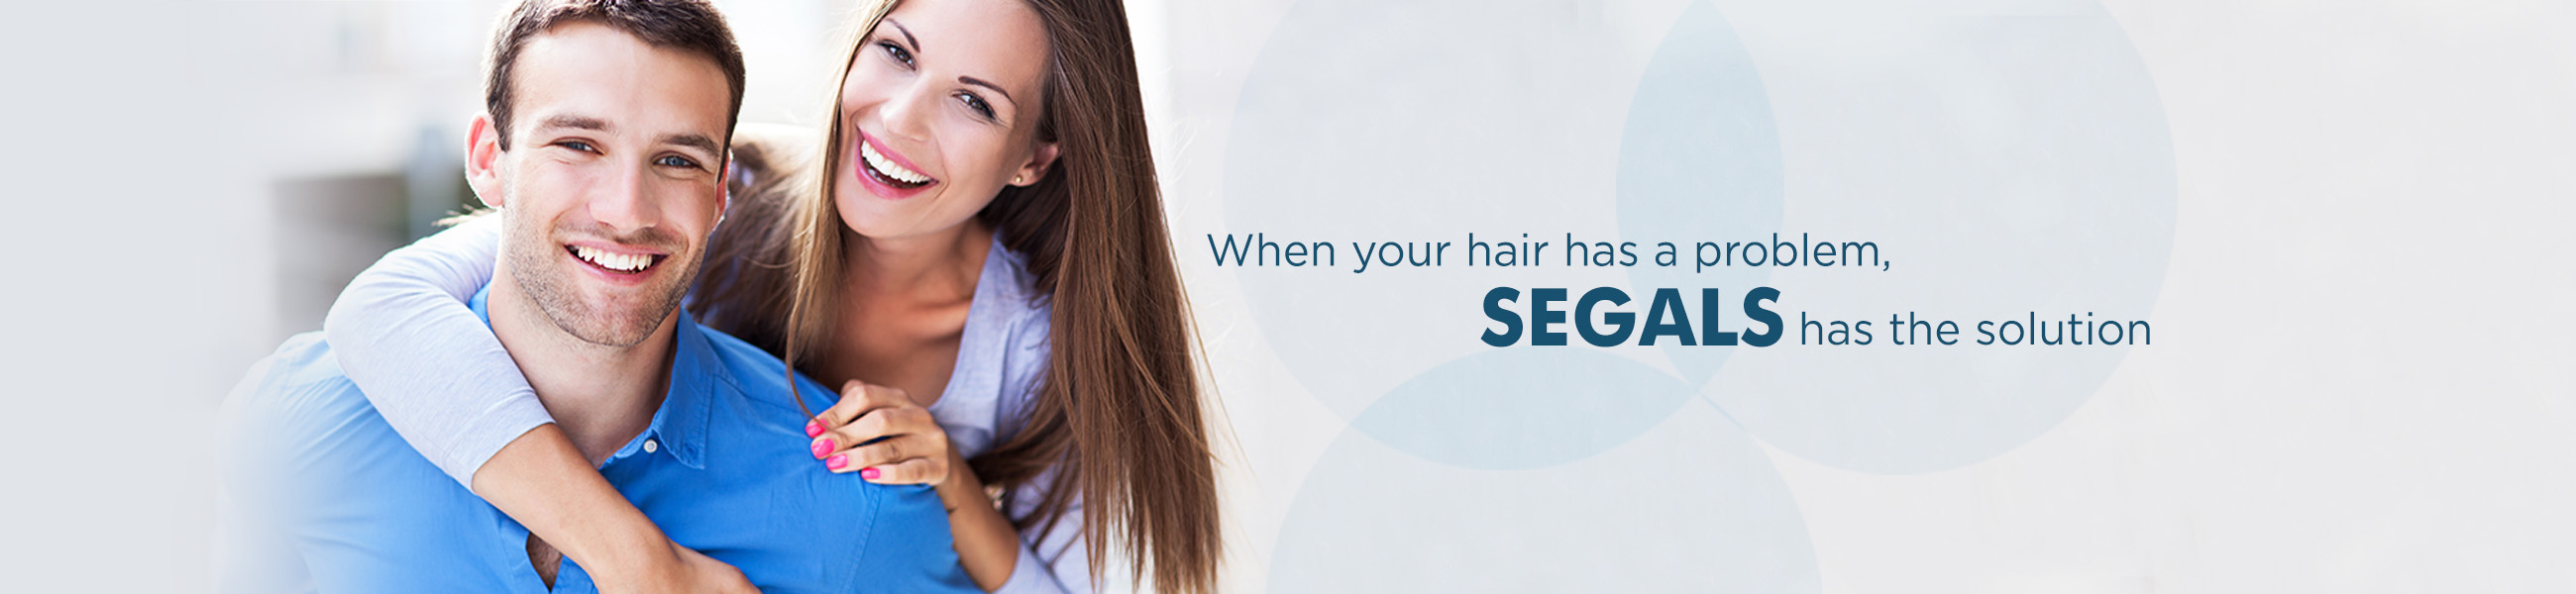 Segals Solutions – When your hair has a problem, Segals has the Solution.